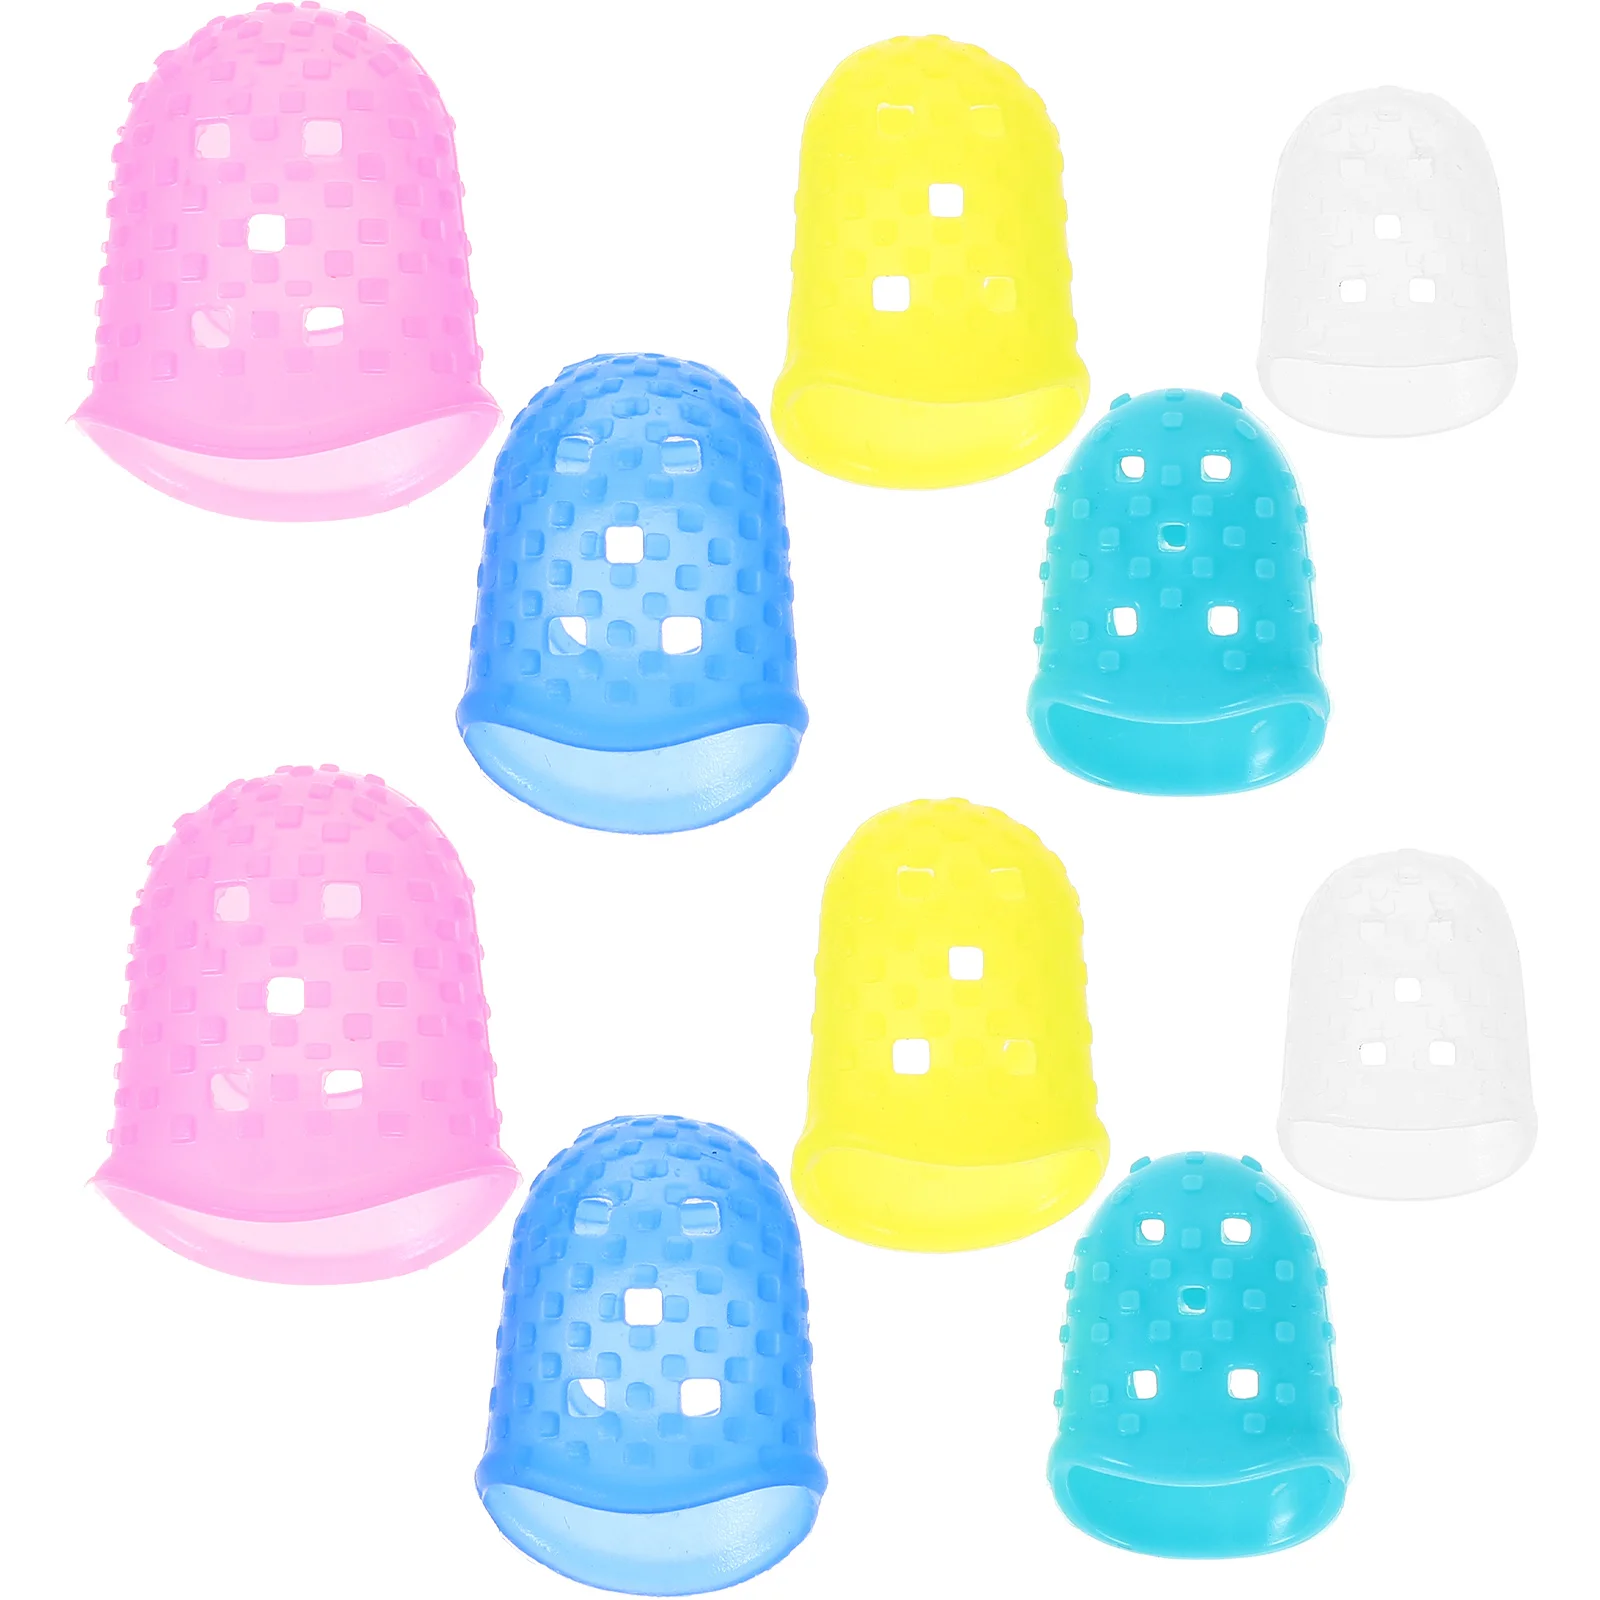 

10 Pcs Guitar Fingertip Protector Hats Covers Silicone Protectors Playing Tips Caps Wax Sculpture